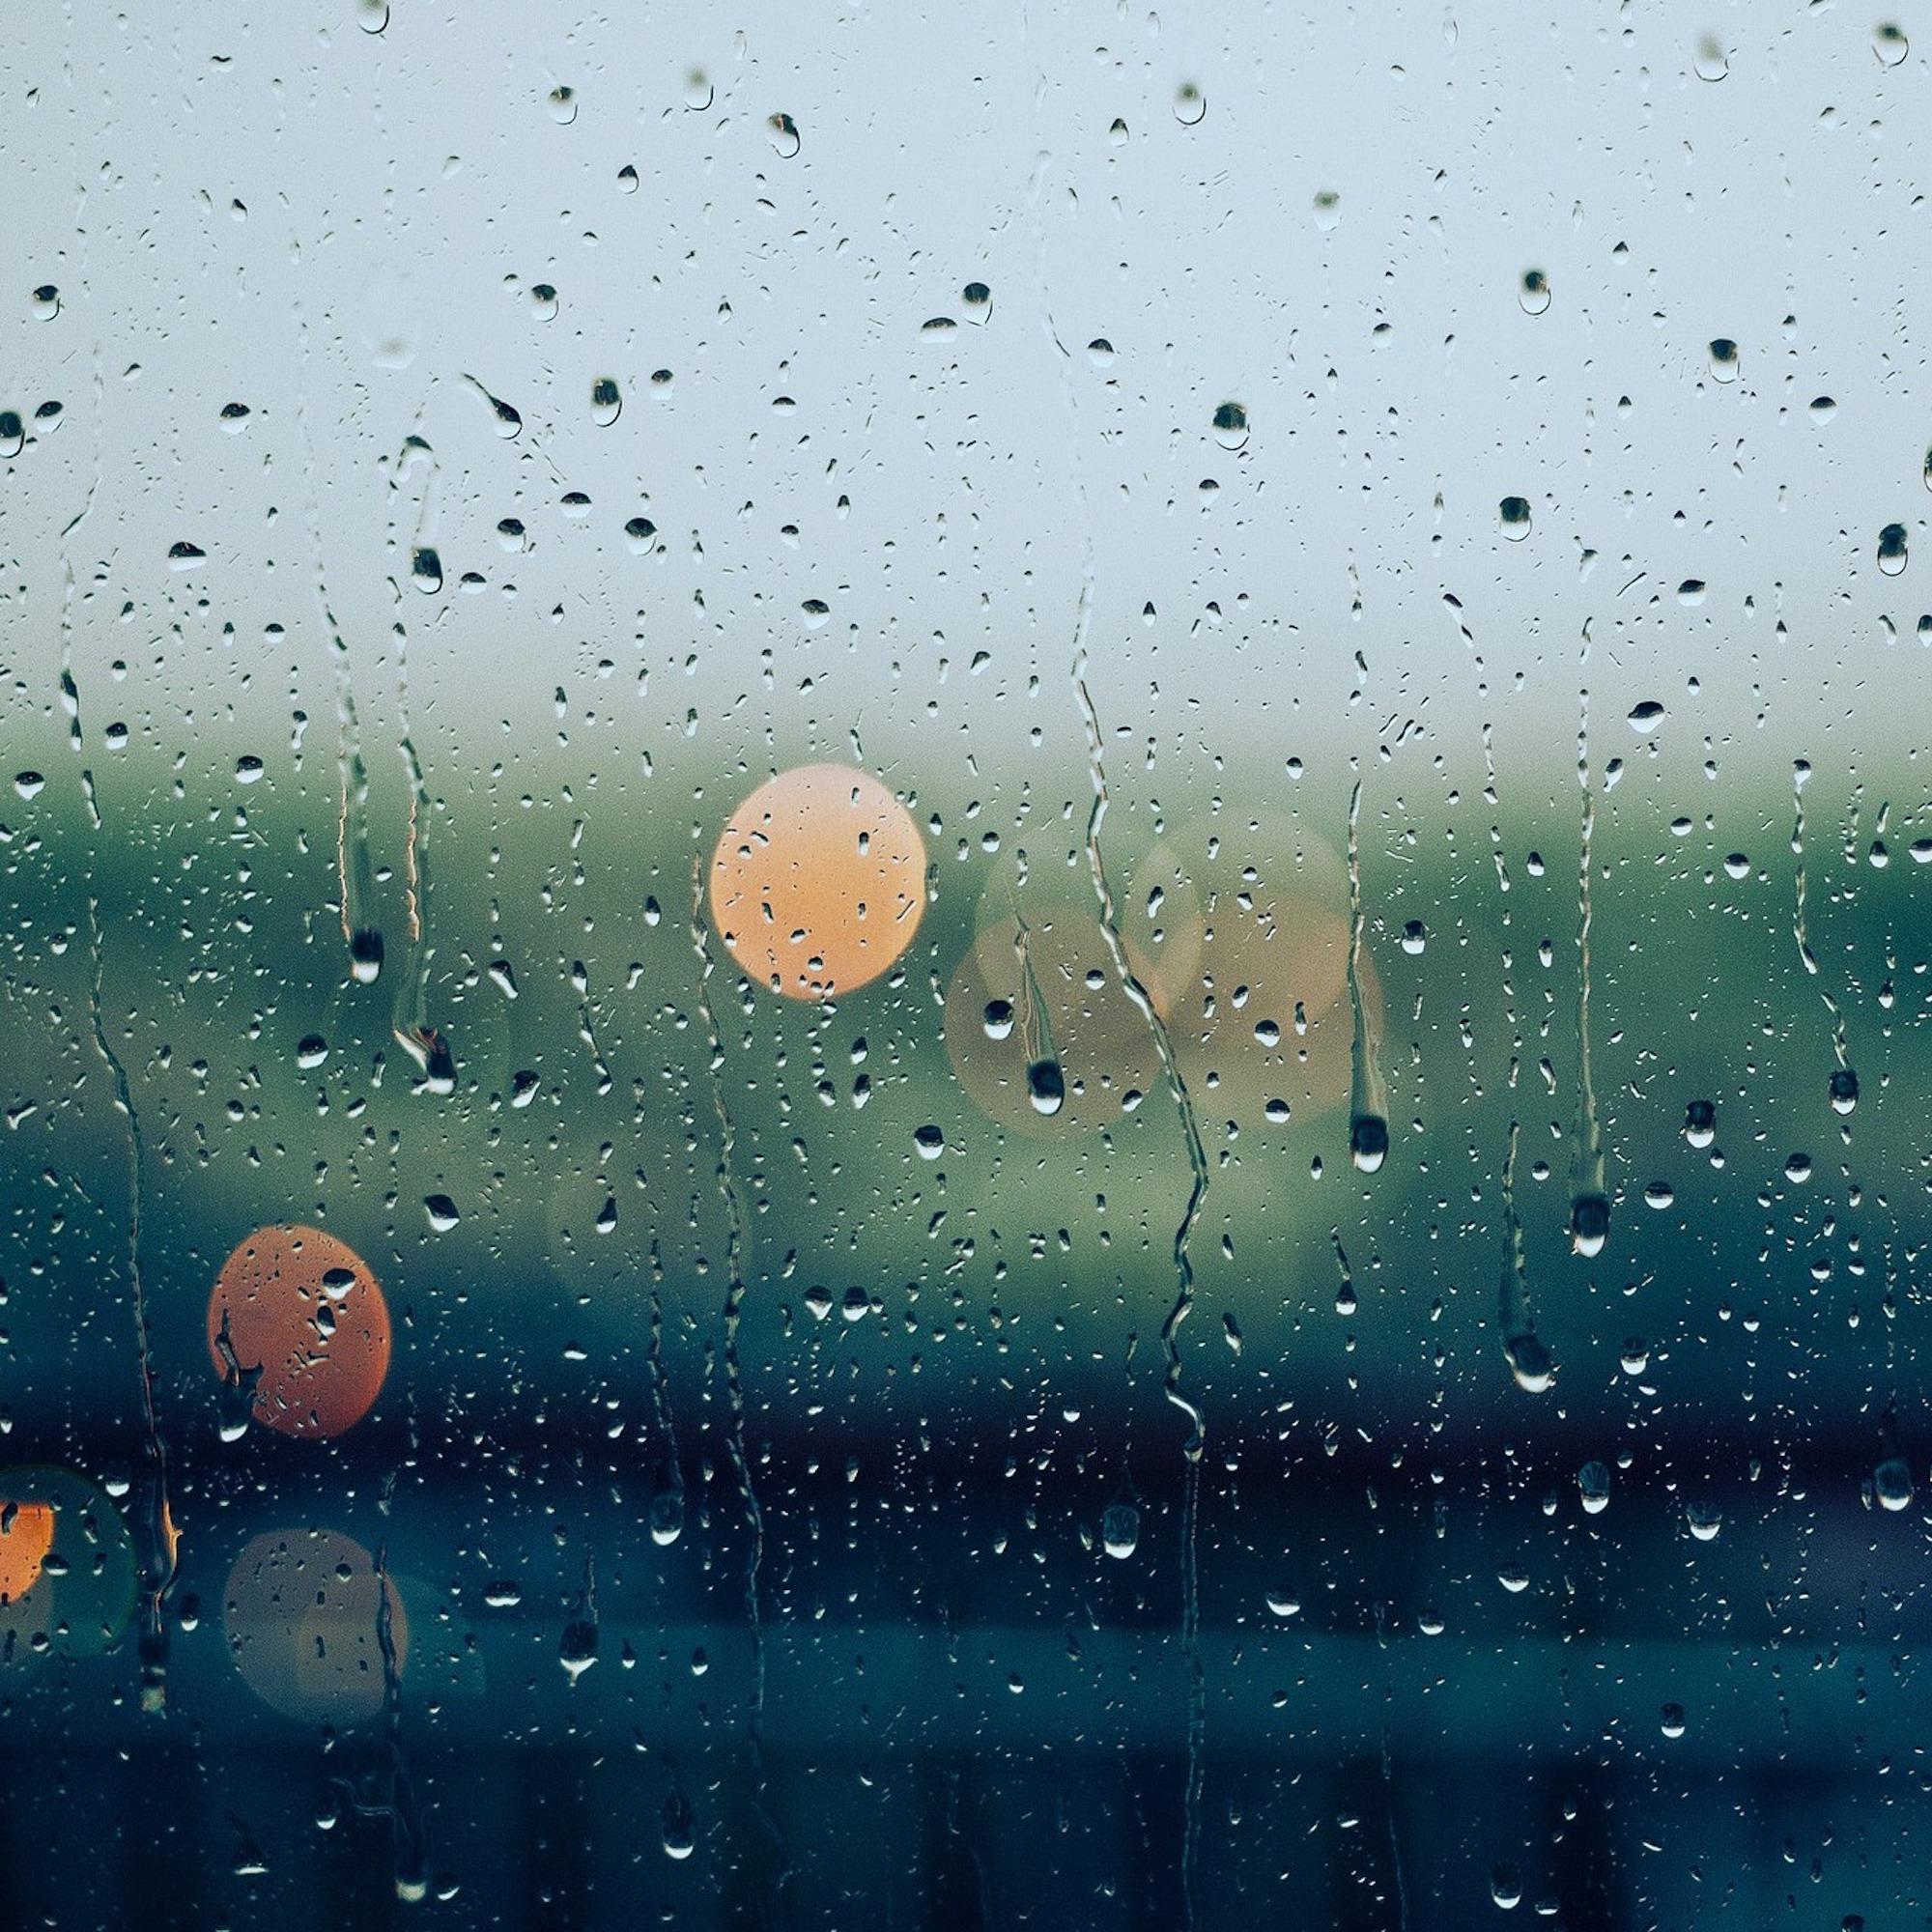 Audible Alchemy: 20 Loopable Rain Recordings to Induce Pure, Unadulterated Bliss